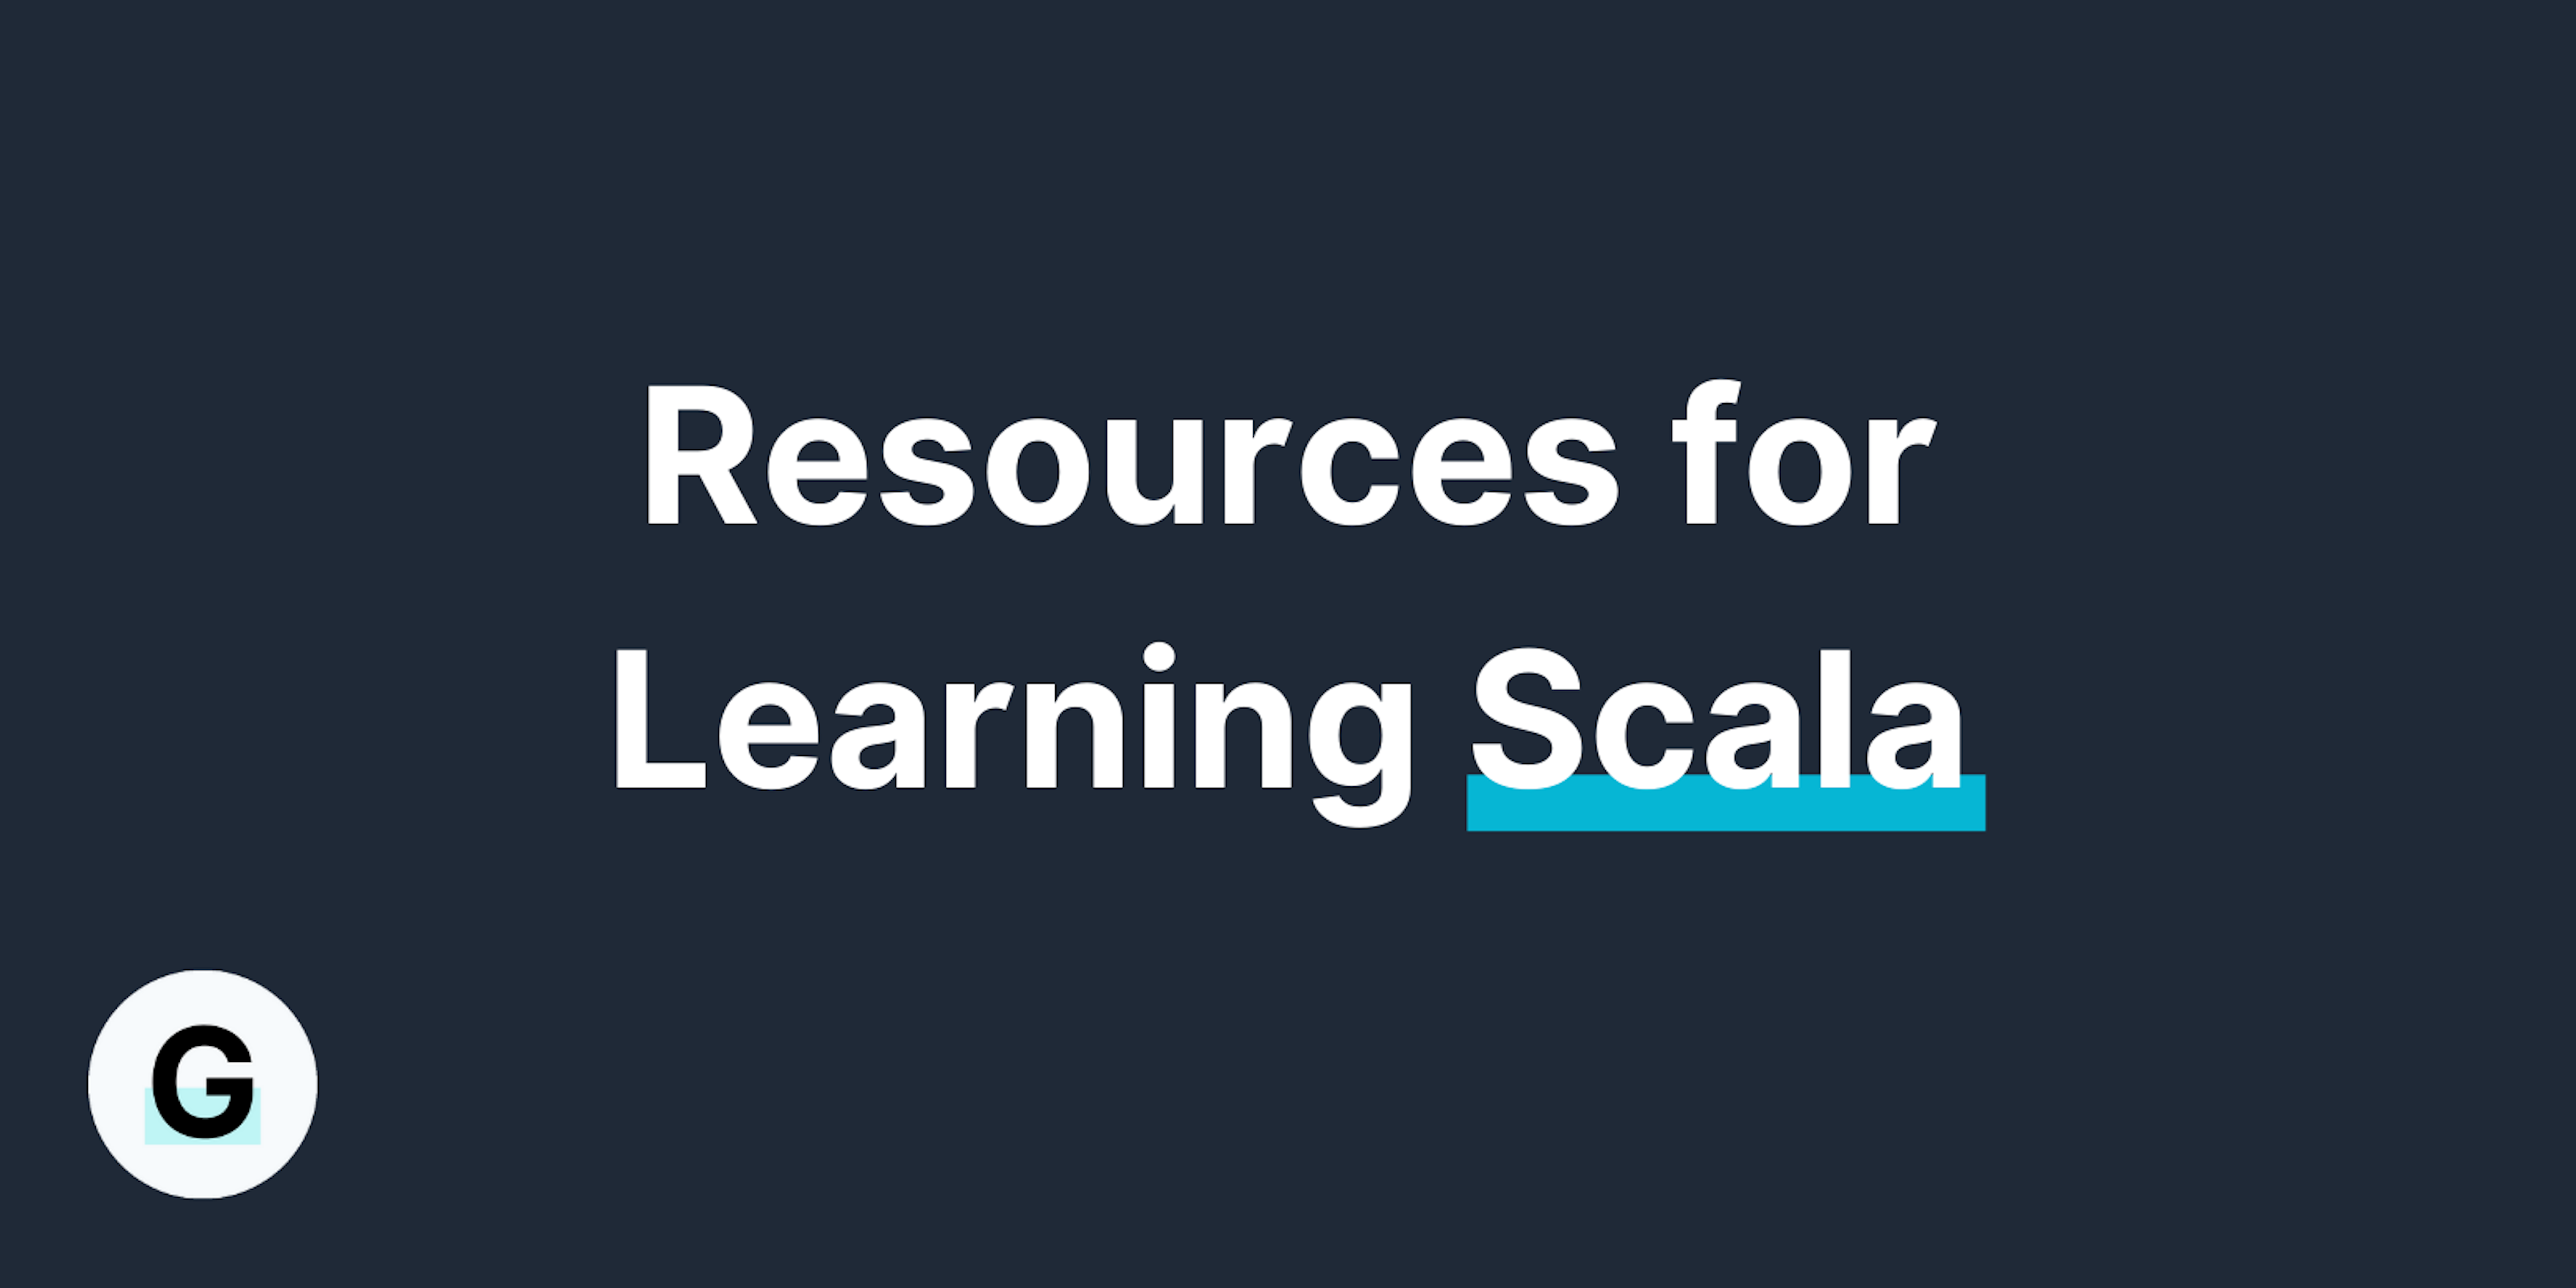 Resources for Learning Scala